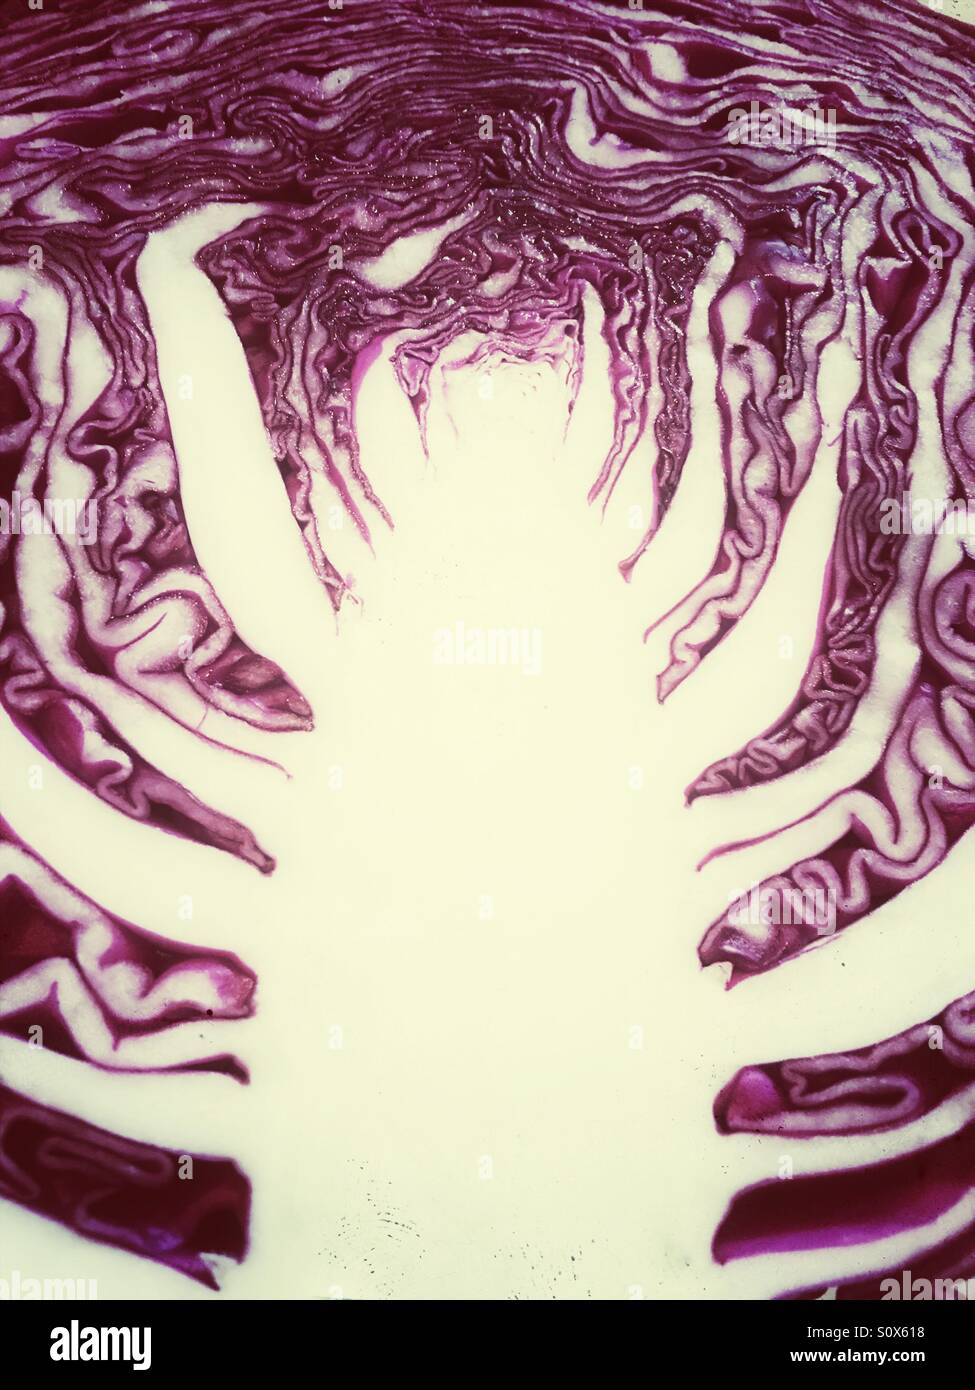 Cross section of a red cabbage Stock Photo